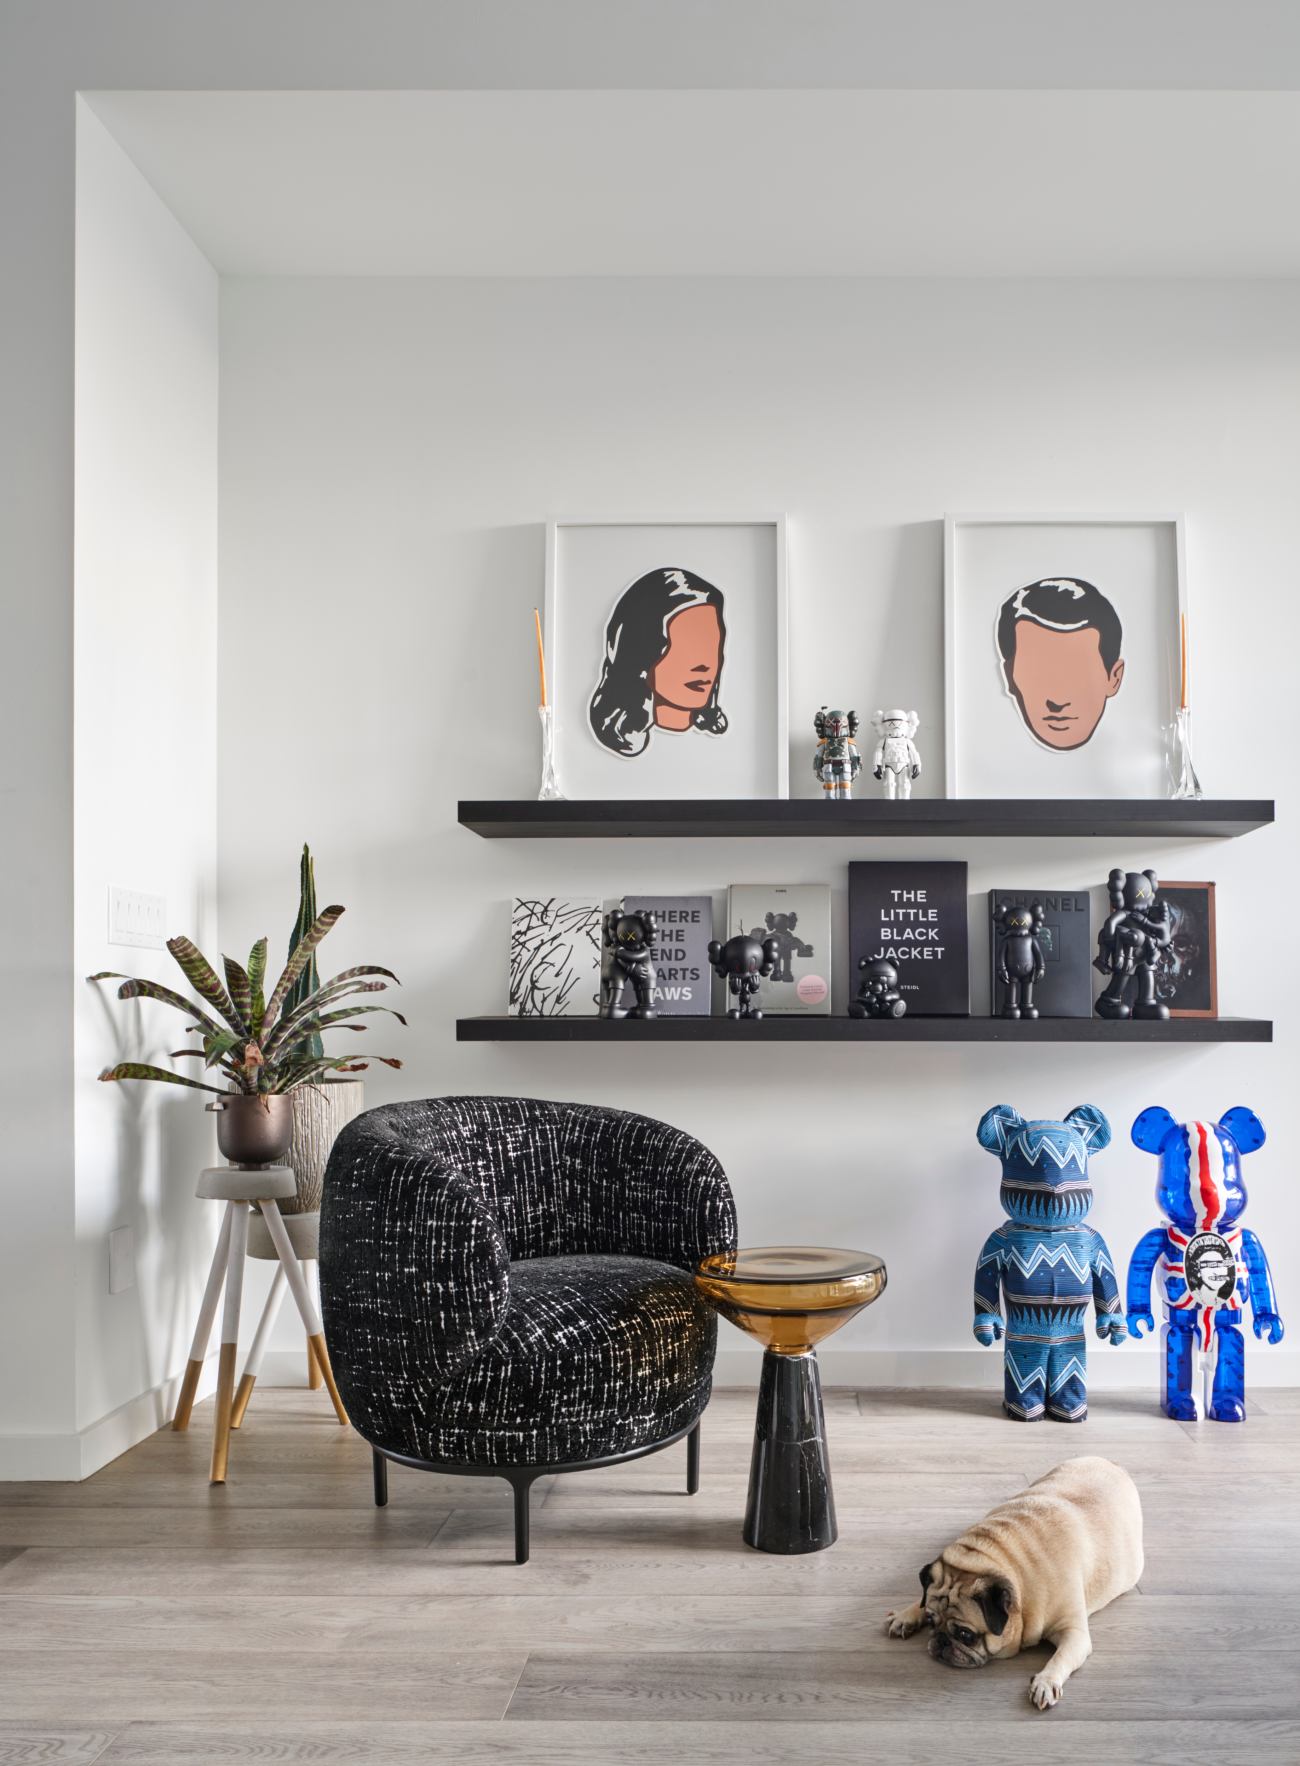 The lounge chair, from Avenue Road, is by Jamie Hayon. The side table, from Klaus, is by Stephen Veit. The prints, by Adriana Oliver, share shelf space with Kaws figurines. On the floor, Stussy 1000% and Sex Pistol 1000% Bearbrick figurines.